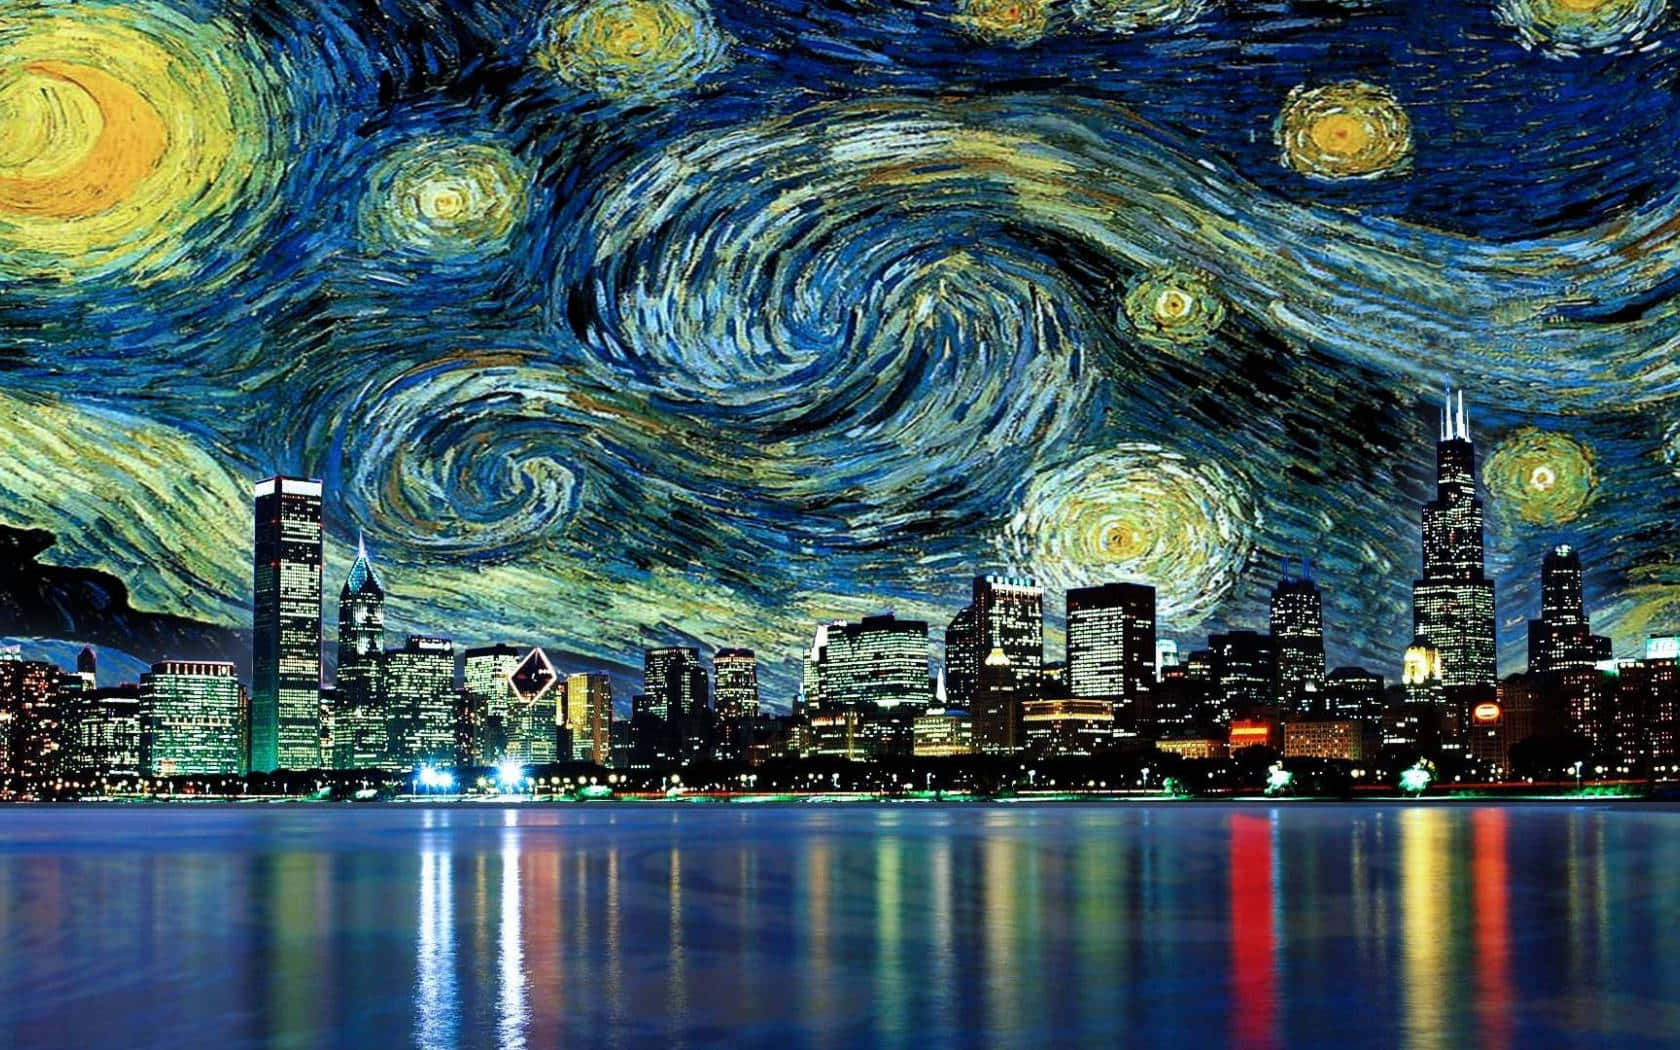 'Starry Night' by Vincent Van Gogh